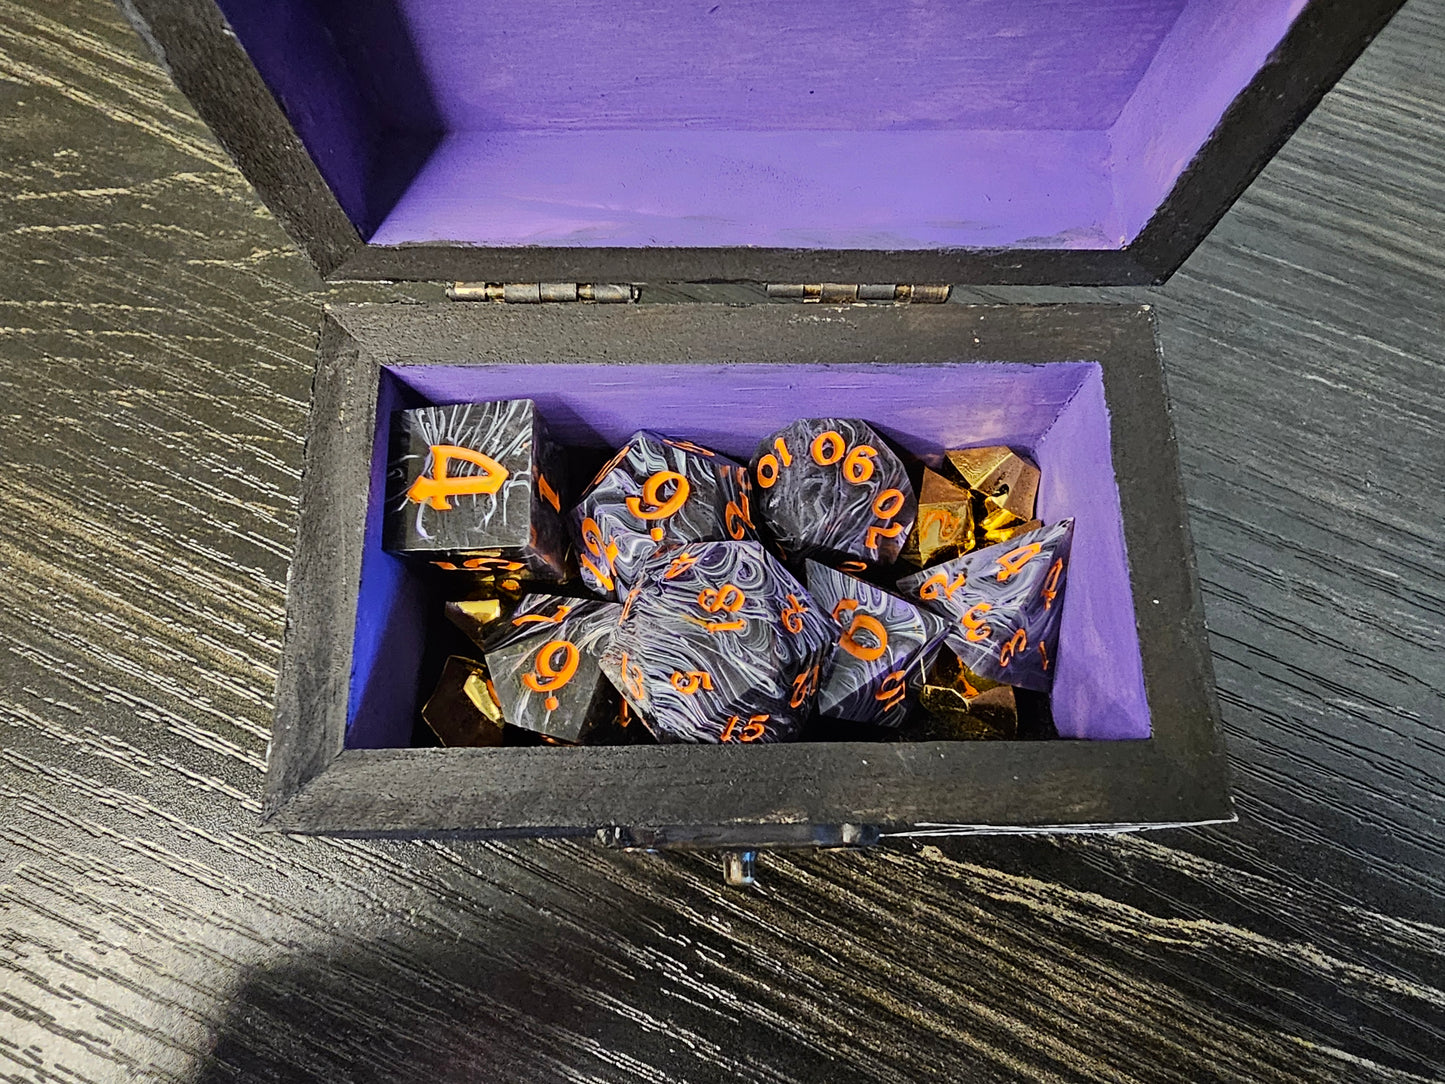 Handmade Spooky Spider Dice Set with Hand-Painted Chest